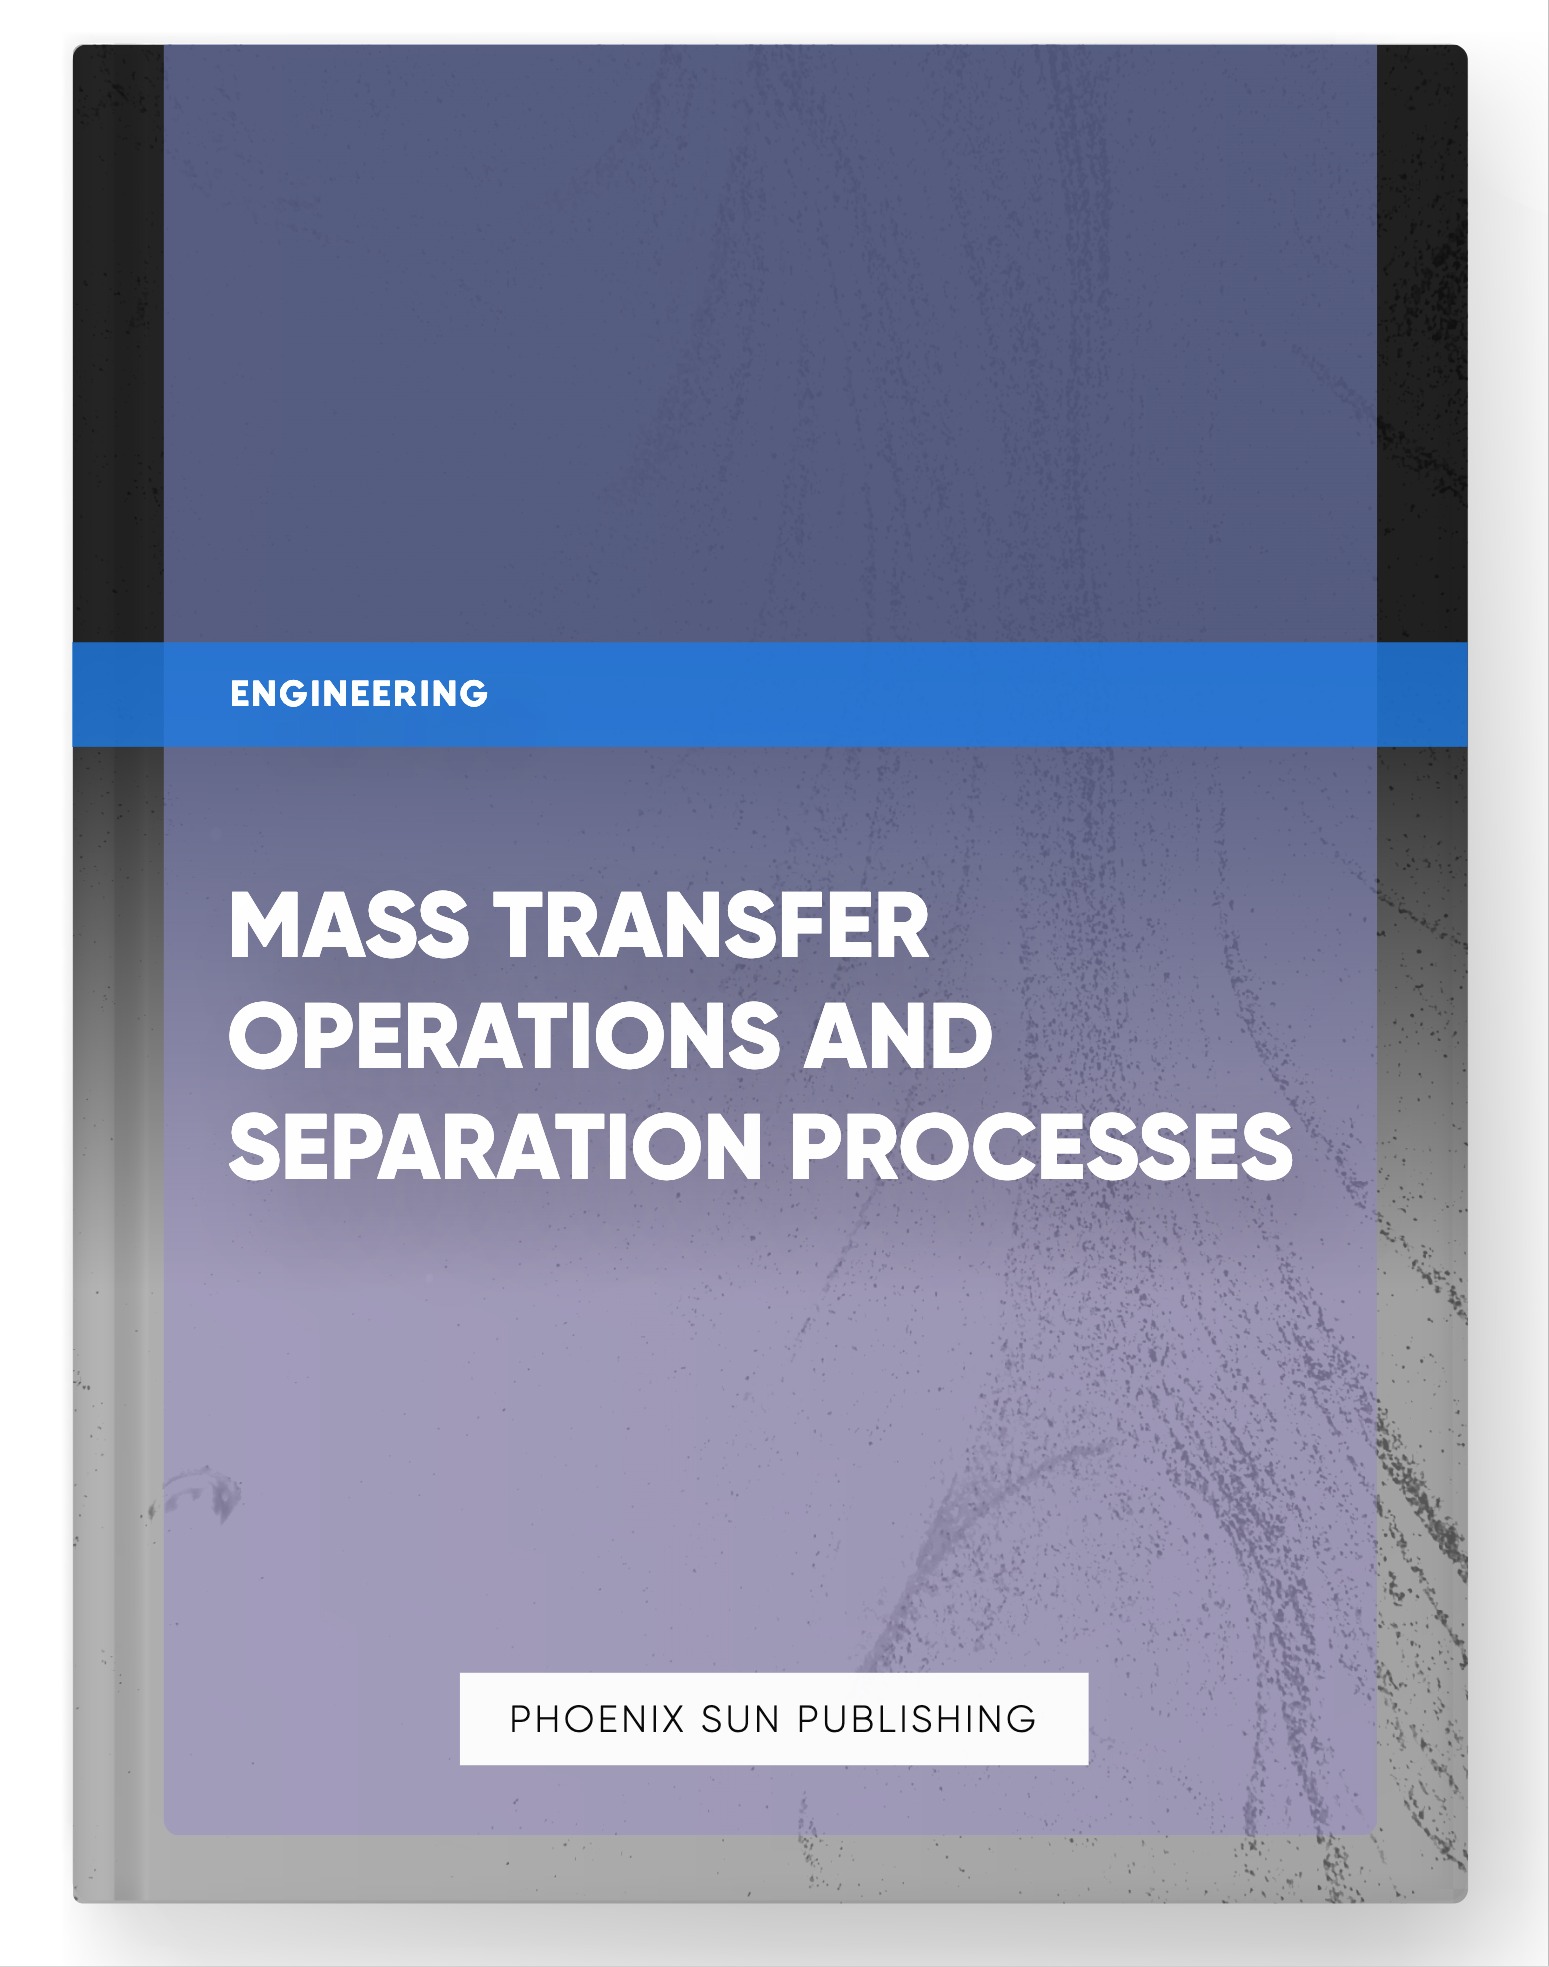 Mass Transfer Operations and Separation Processes